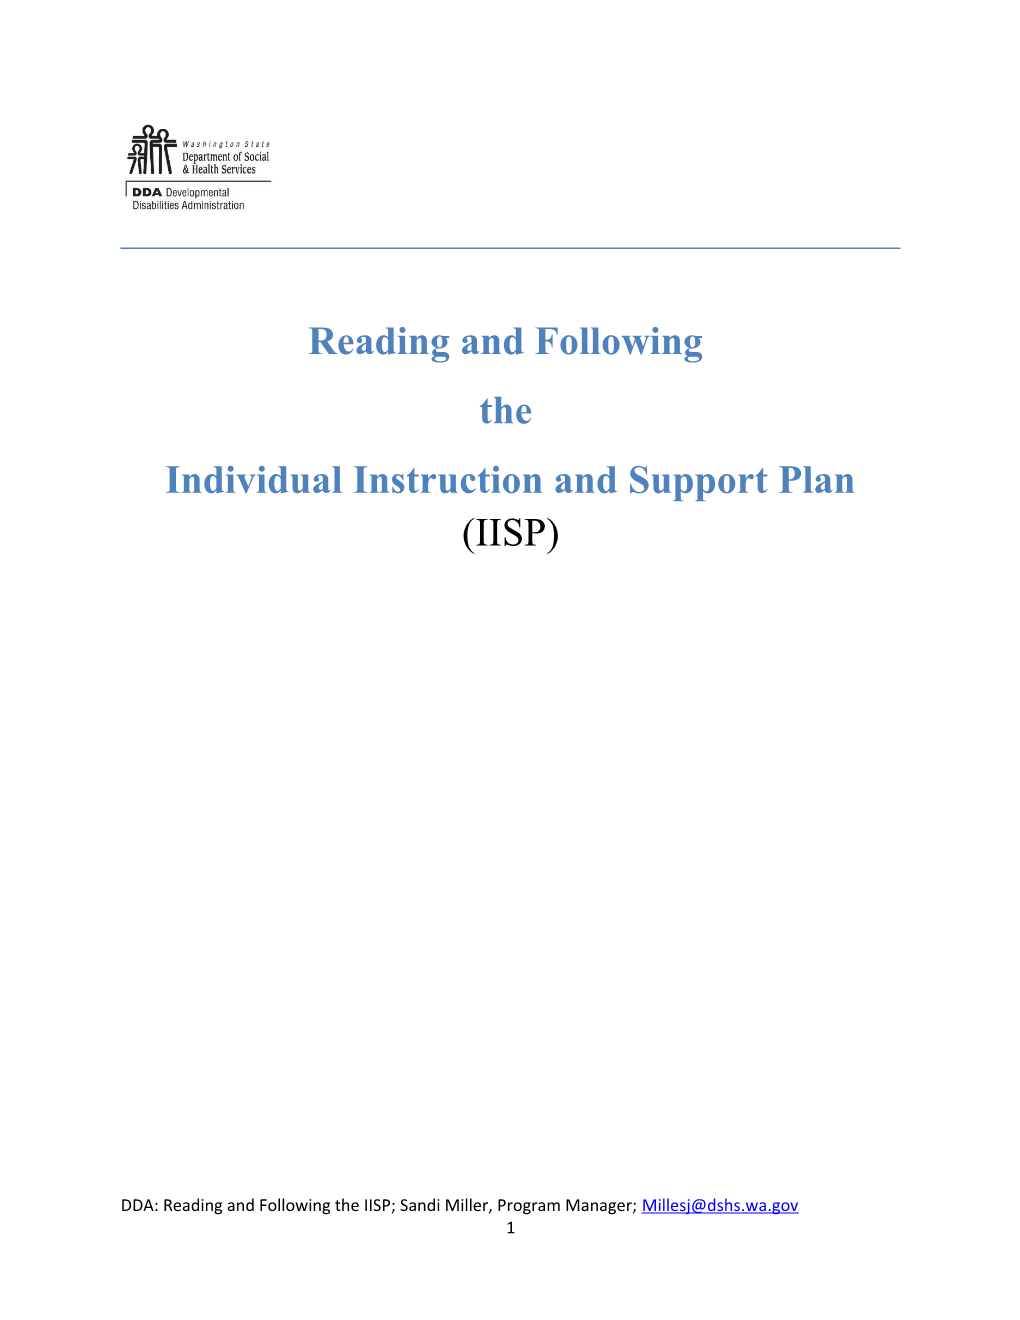 Individual Instruction and Support Plan